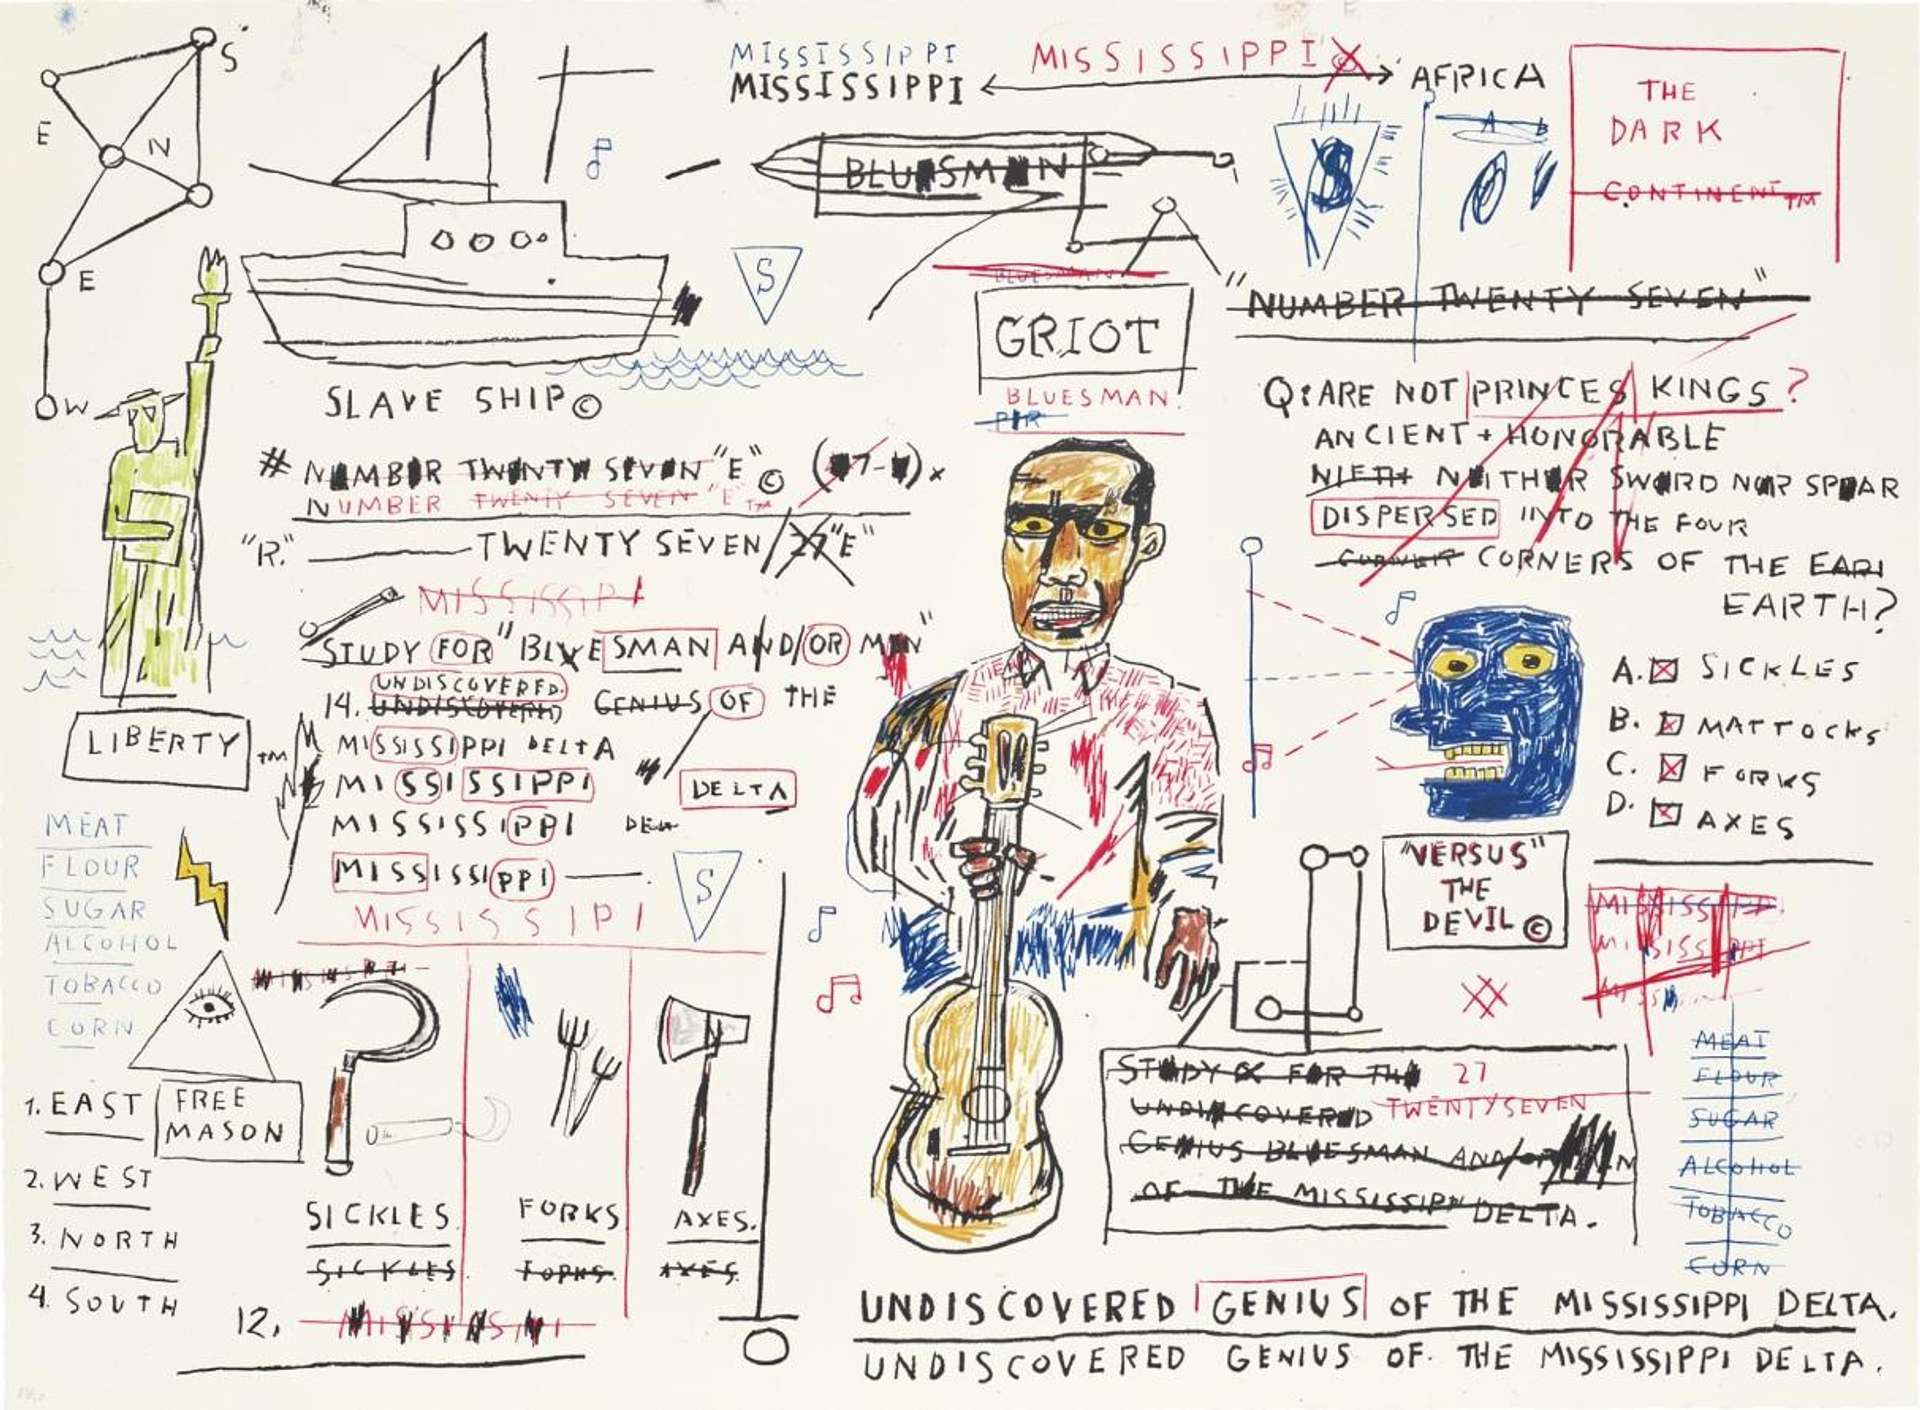 An image of the print Undiscovered Genius by Jean-Michel Basquiat. At the centre of the composition is a black man holding a guitar, who is the ‘Undiscovered Genius’ focal figure of the work. Around his intensely coloured figure are a series of sketches and text panels that encourage the viewer to read the work as much as view it.